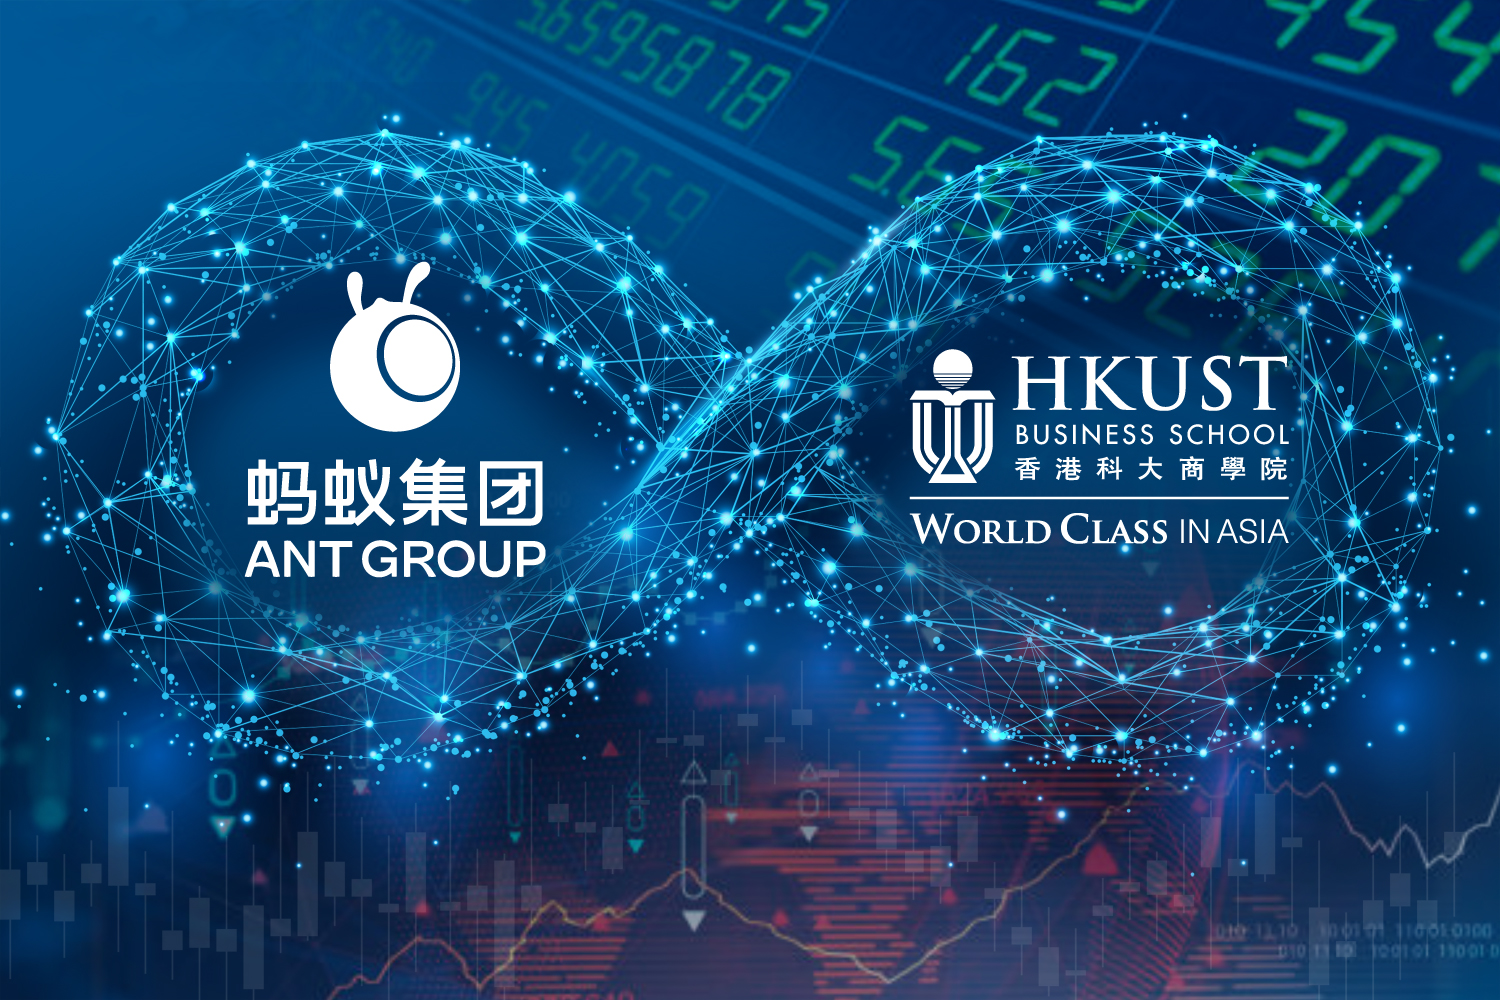 HKUST Business School and Ant Group have signed an MoU to promote fintech talent development through academia-industry collaboration 